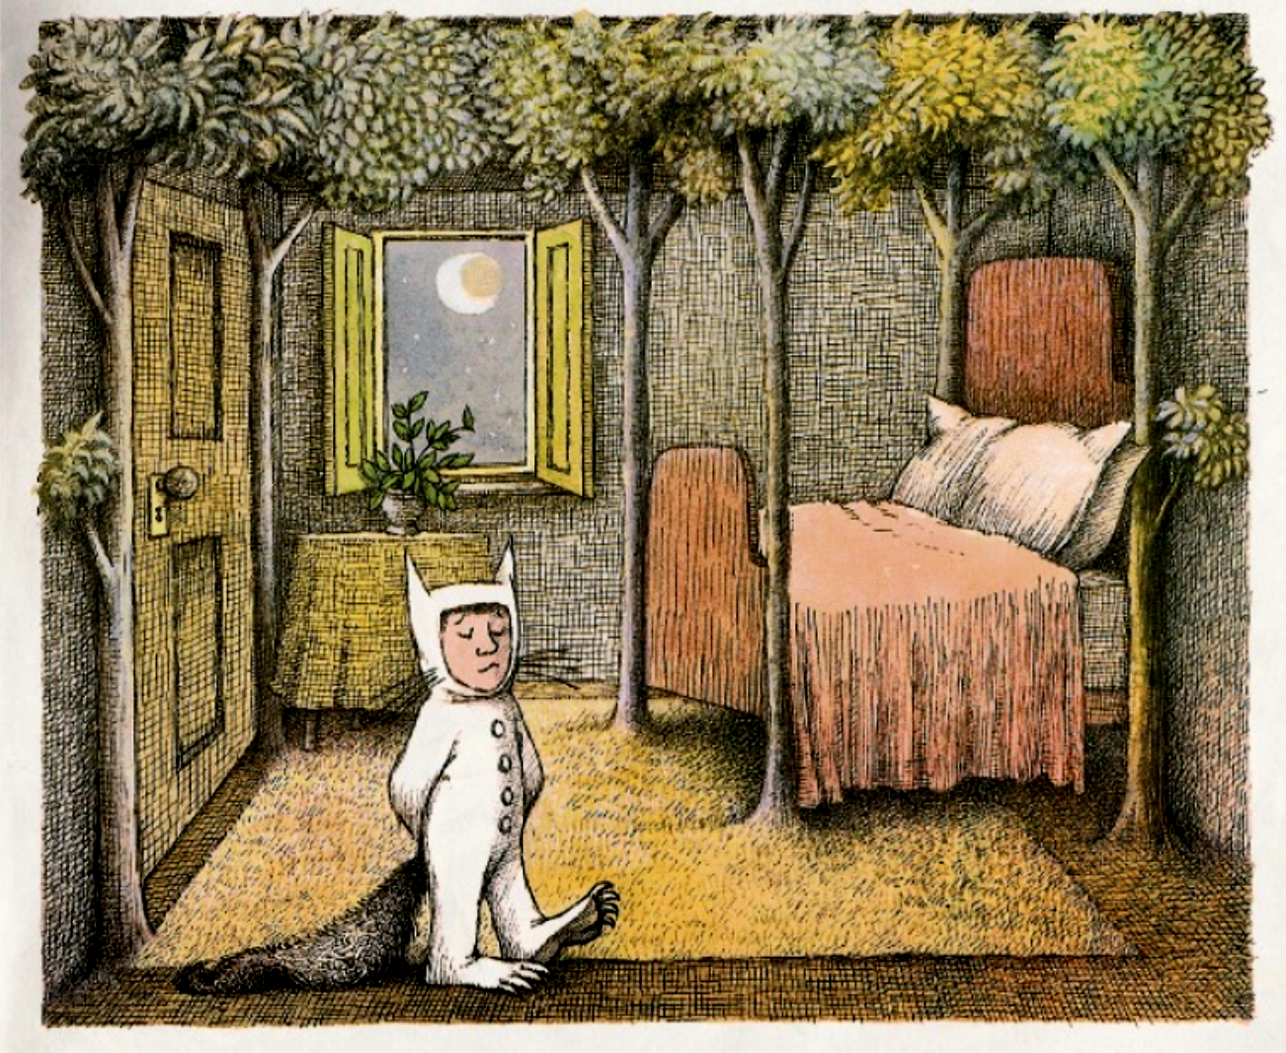 Where the Wild Things Are Sendak example of art as story